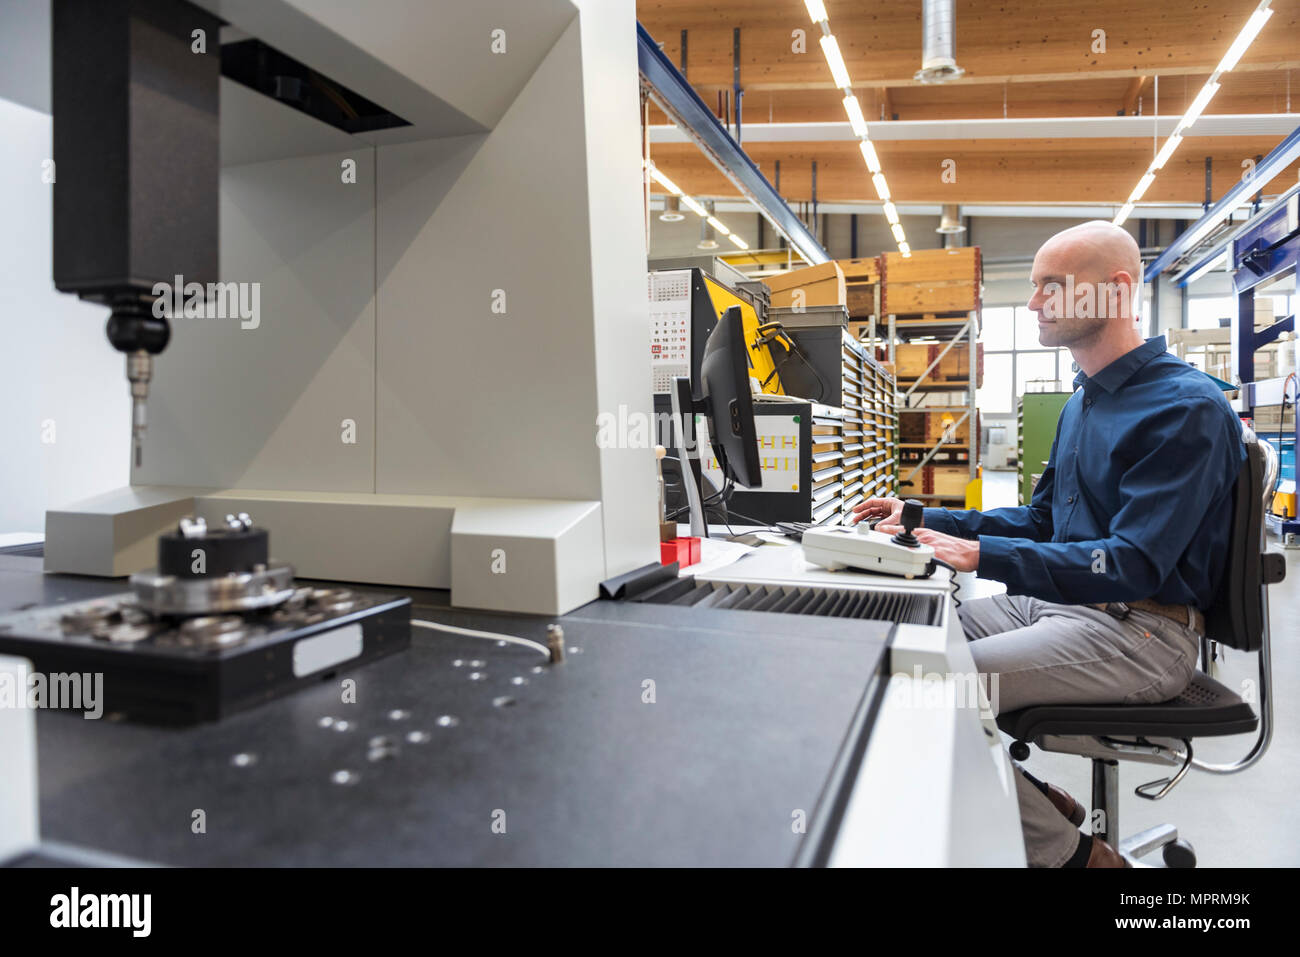 Man using computer at machine in modern factory Stock Photo